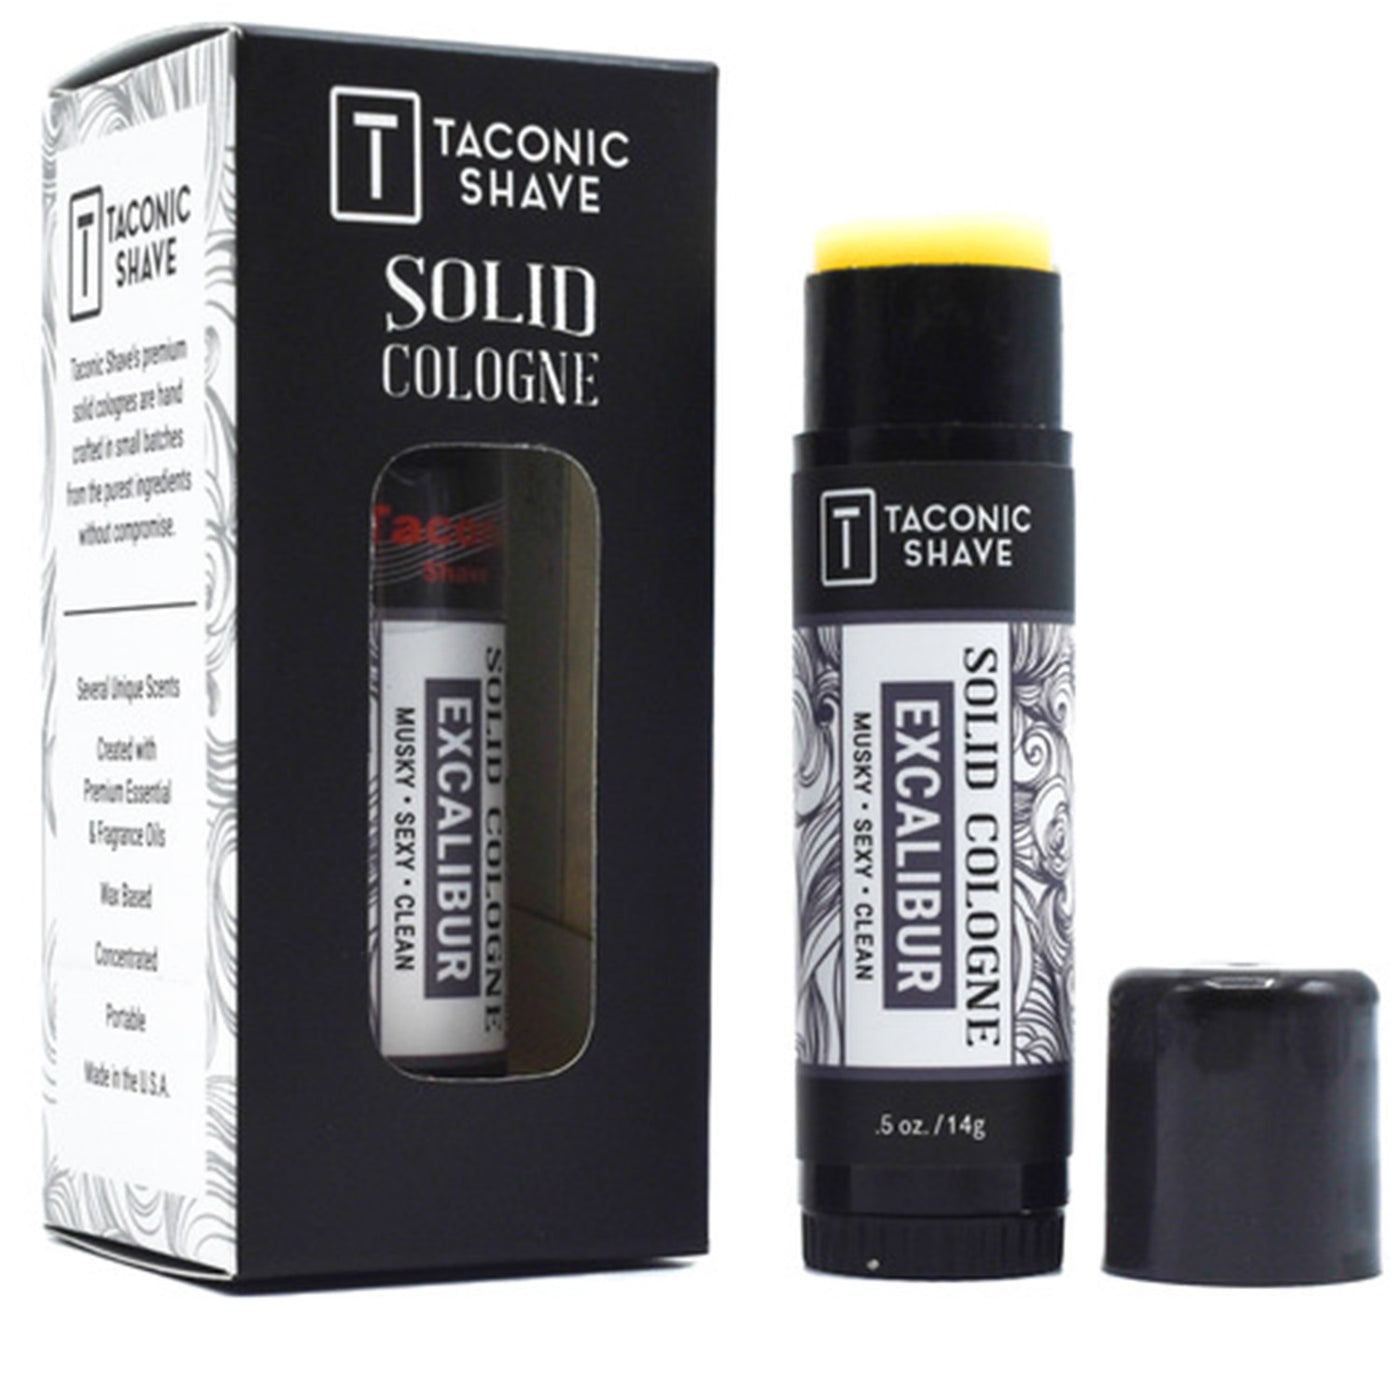  Taconic Shave Excalibur Solid Cologne by Taconic Shave sold by Naked Armor Razors